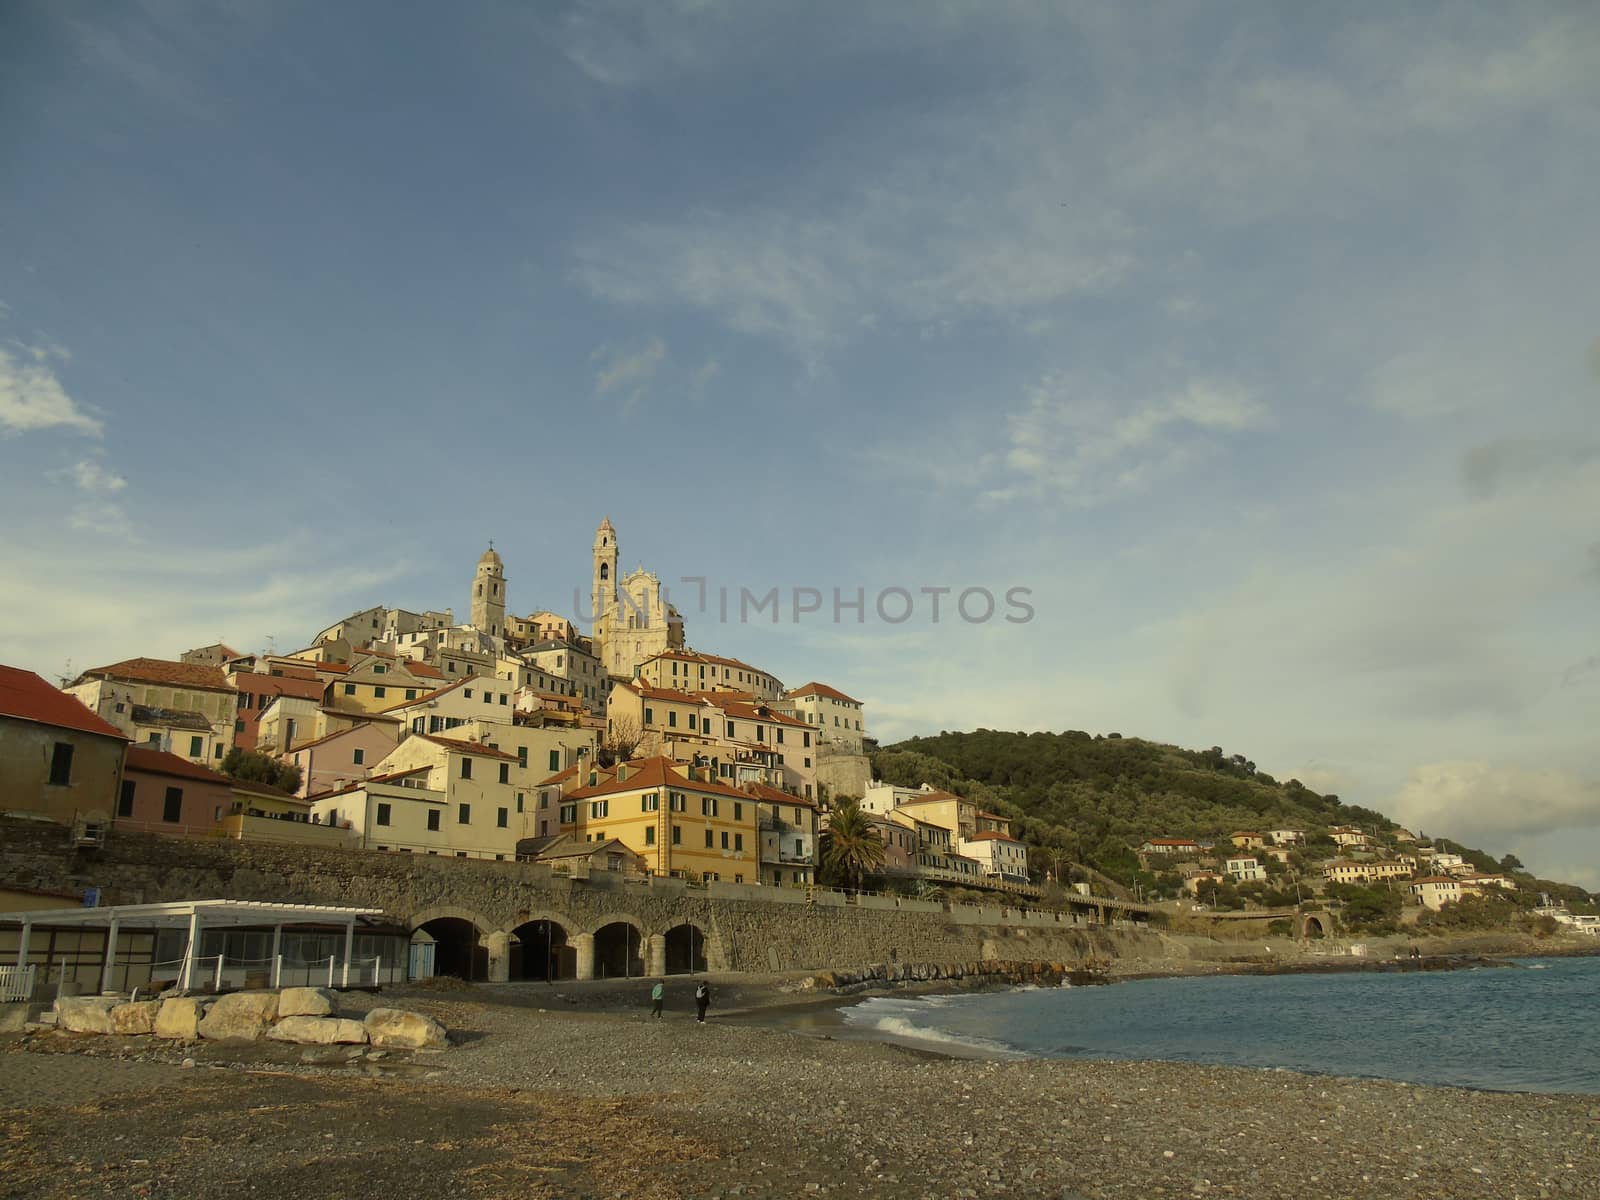 Cervo Ligure, Italy - 06/15/2020: Travelling around the Riviera Ligure in summer days. Beautiful photography of the small vilagges near the sea with typical old buildings.